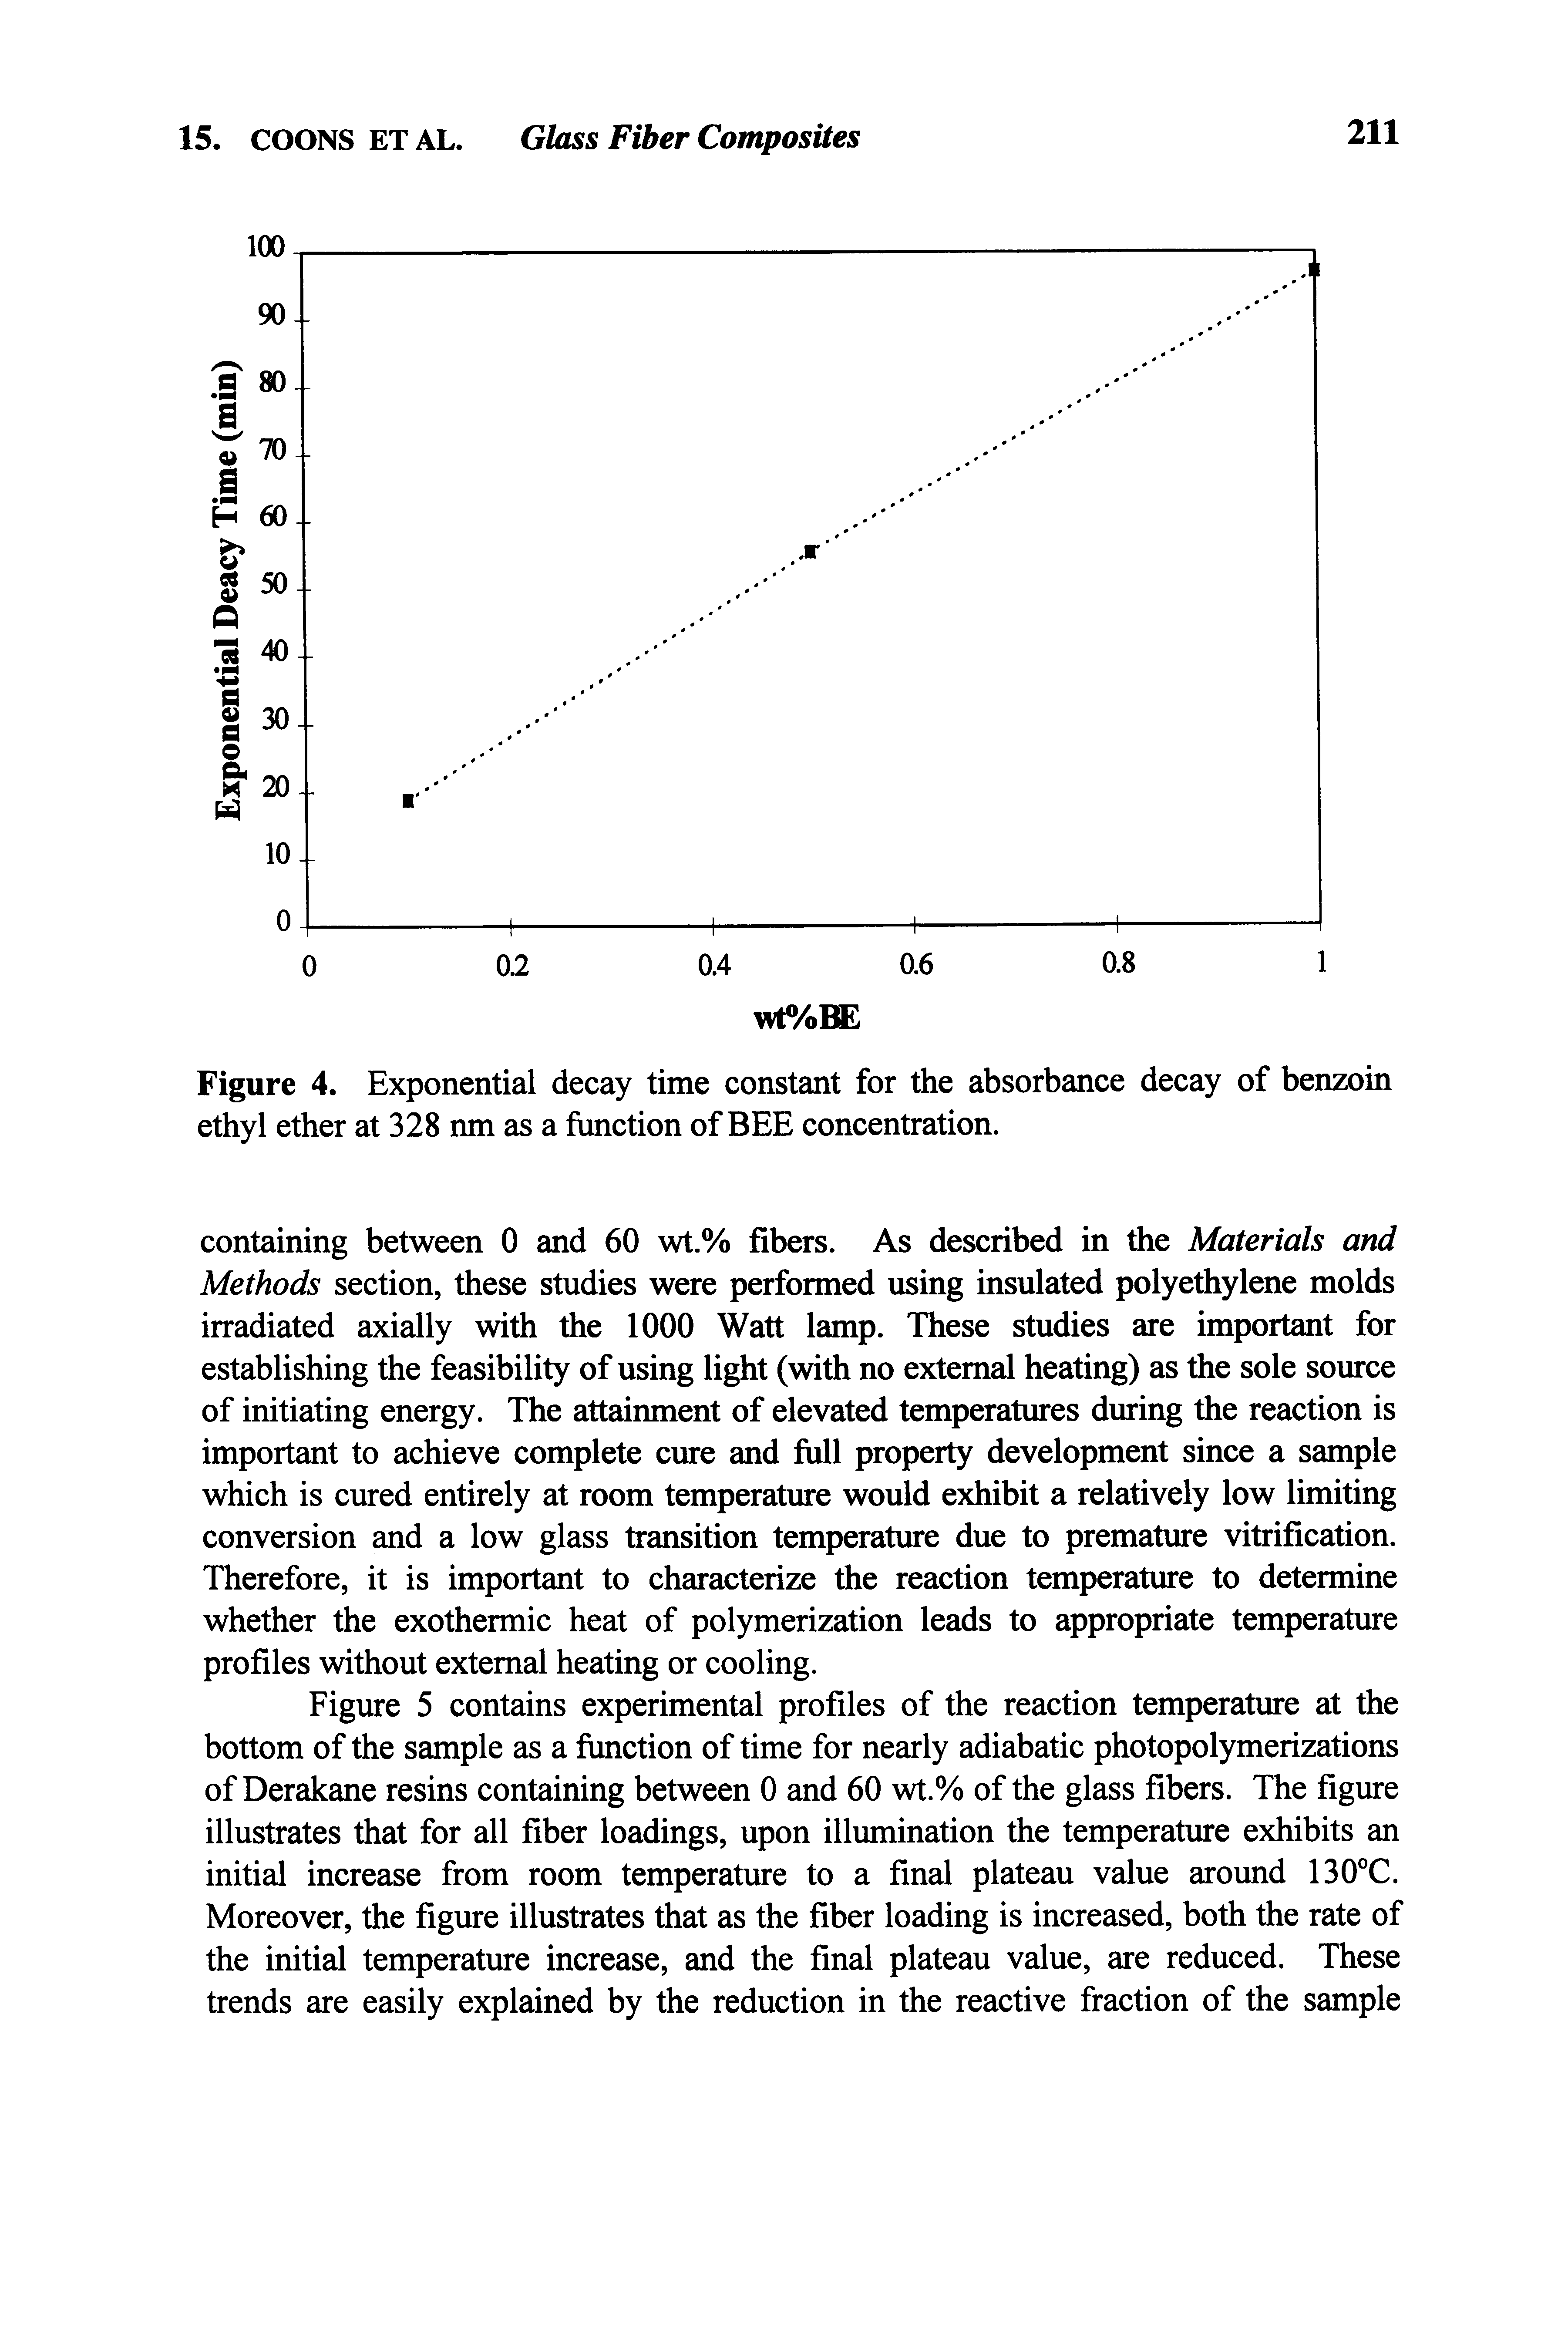 Figure 4. Exponential decay time constant for the absorbance decay of benzoin ethyl ether at 328 nm as a function of BEE concentration.